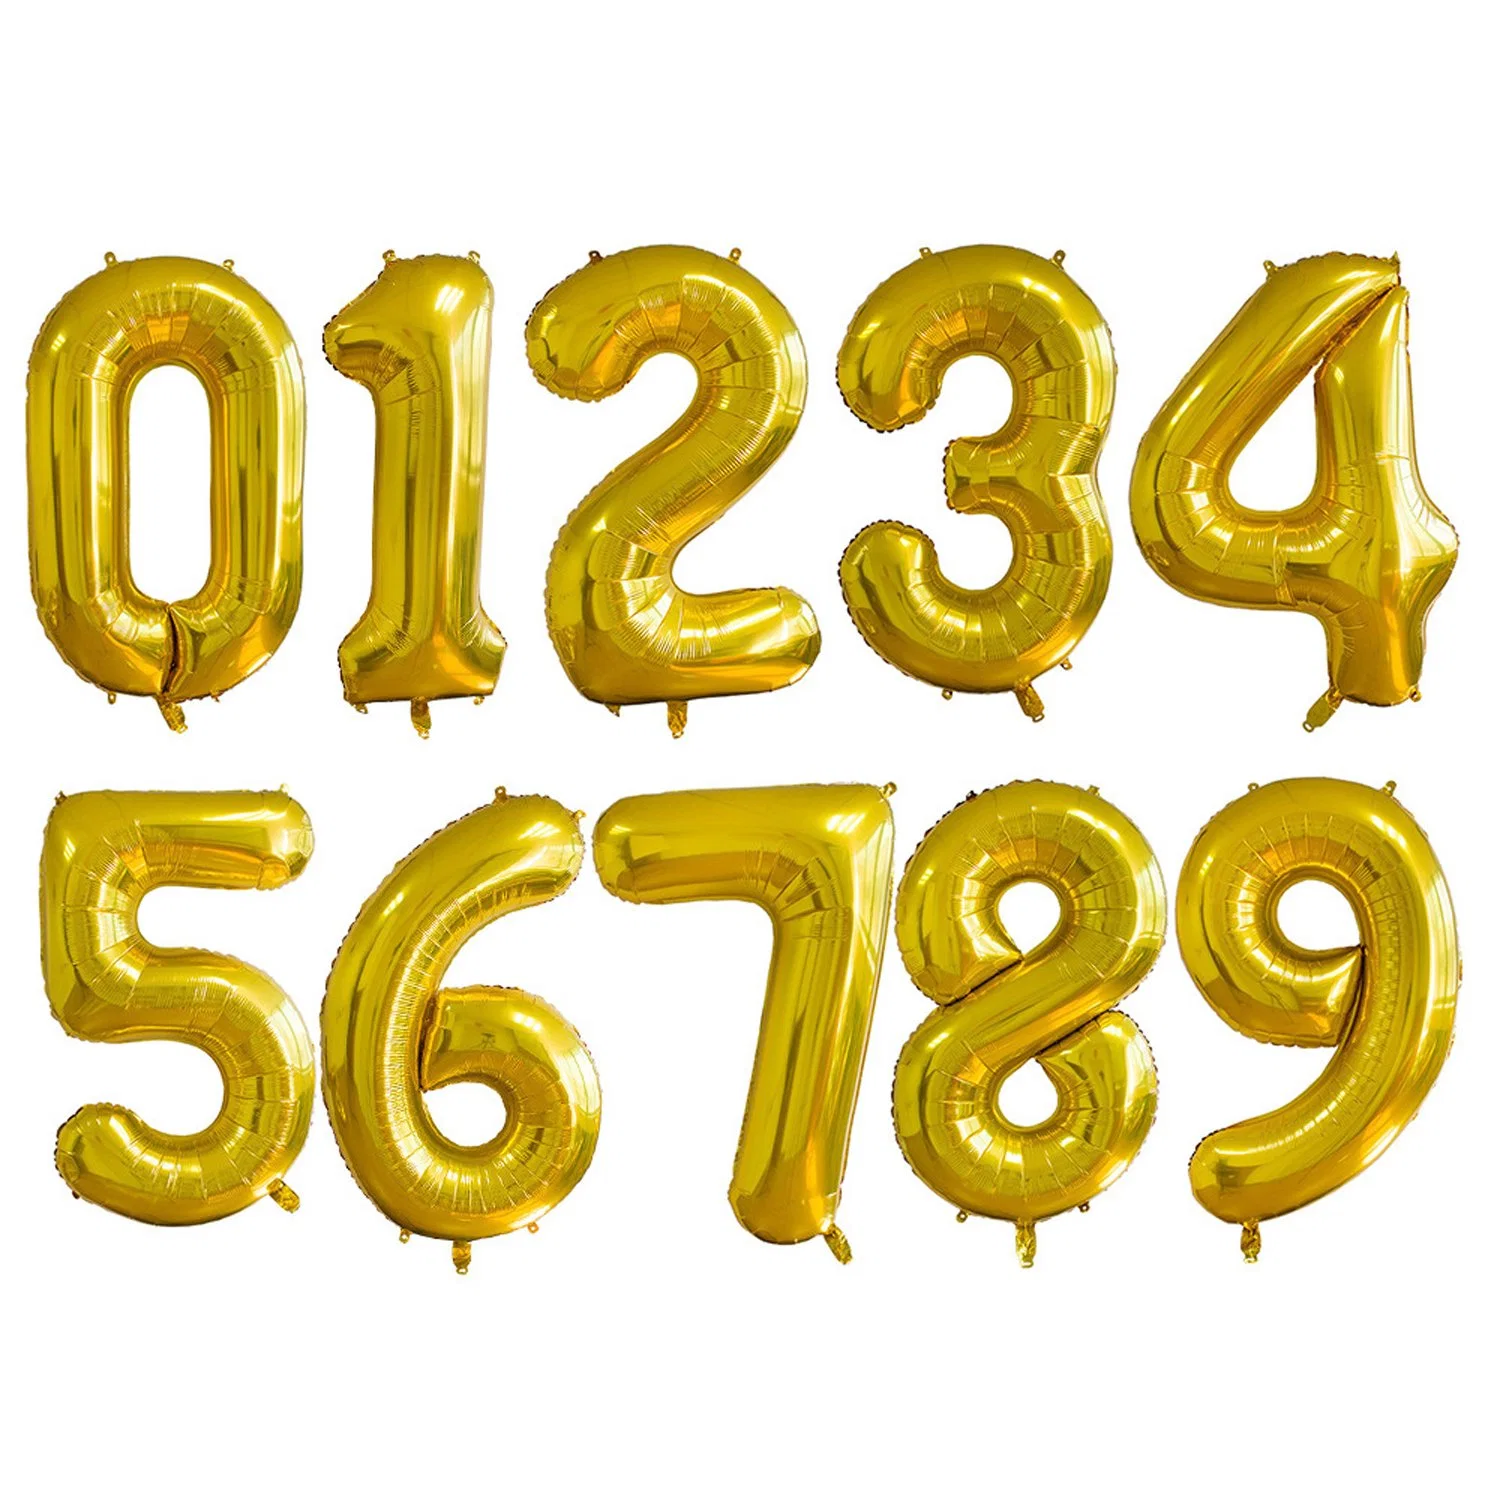 Gold Big Foil Helium 32 Inch Mylar Digital Jumbo Number Balloons for Party Decorations